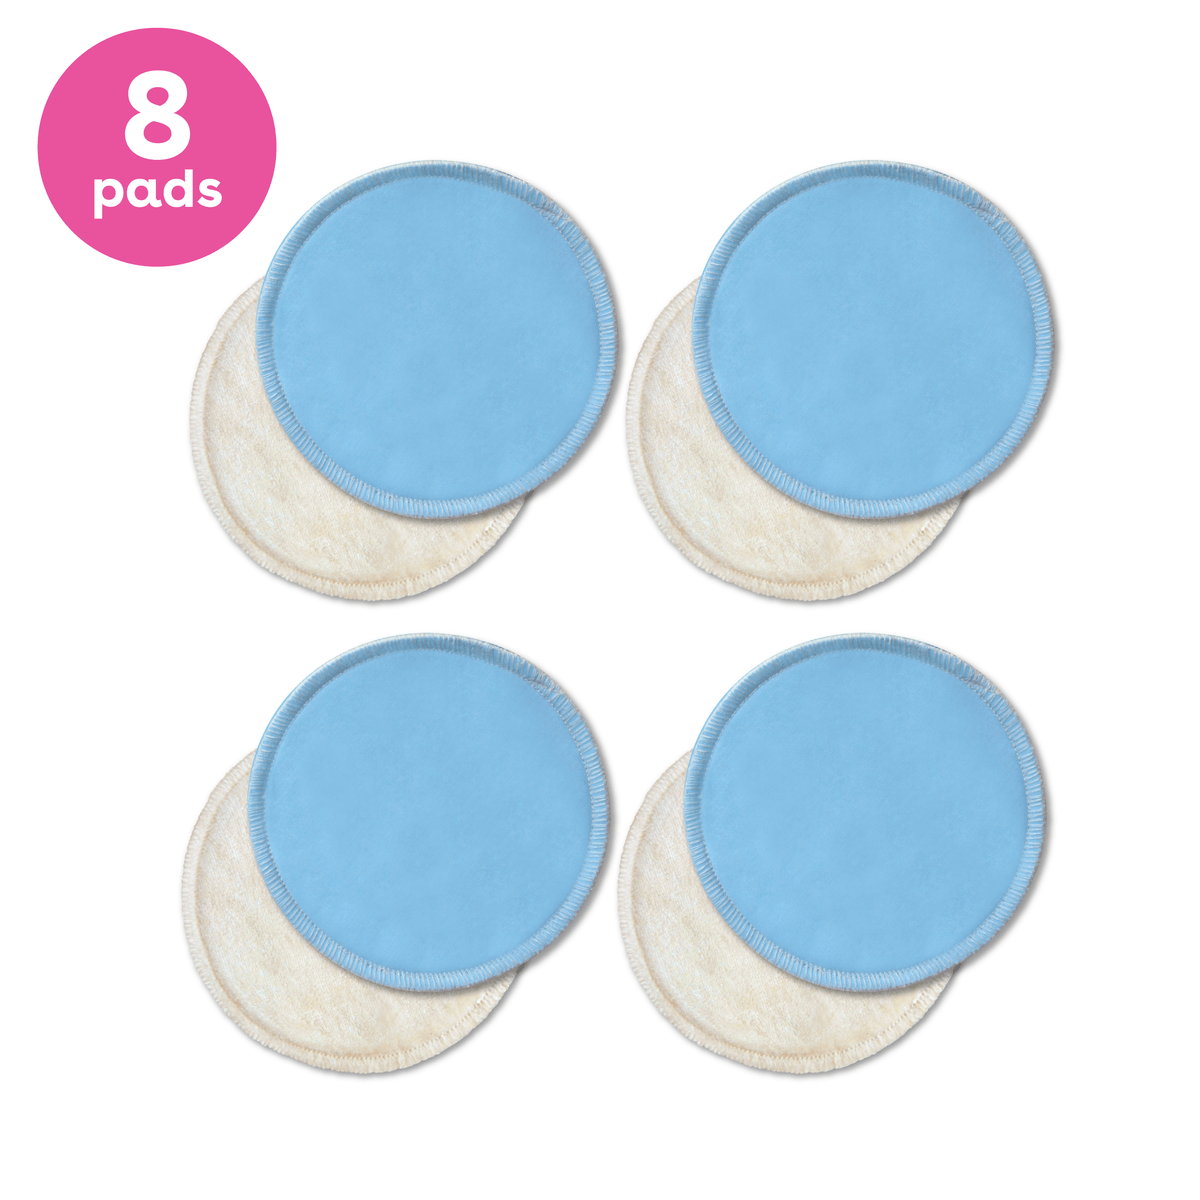 Reusable Breast Pads, Nursing Pads, Washable Breast Pads, Cloth Nursing Pads,  Bamboo Breast Pads, New Mum Gift, Baby Shower Gift, Pads 